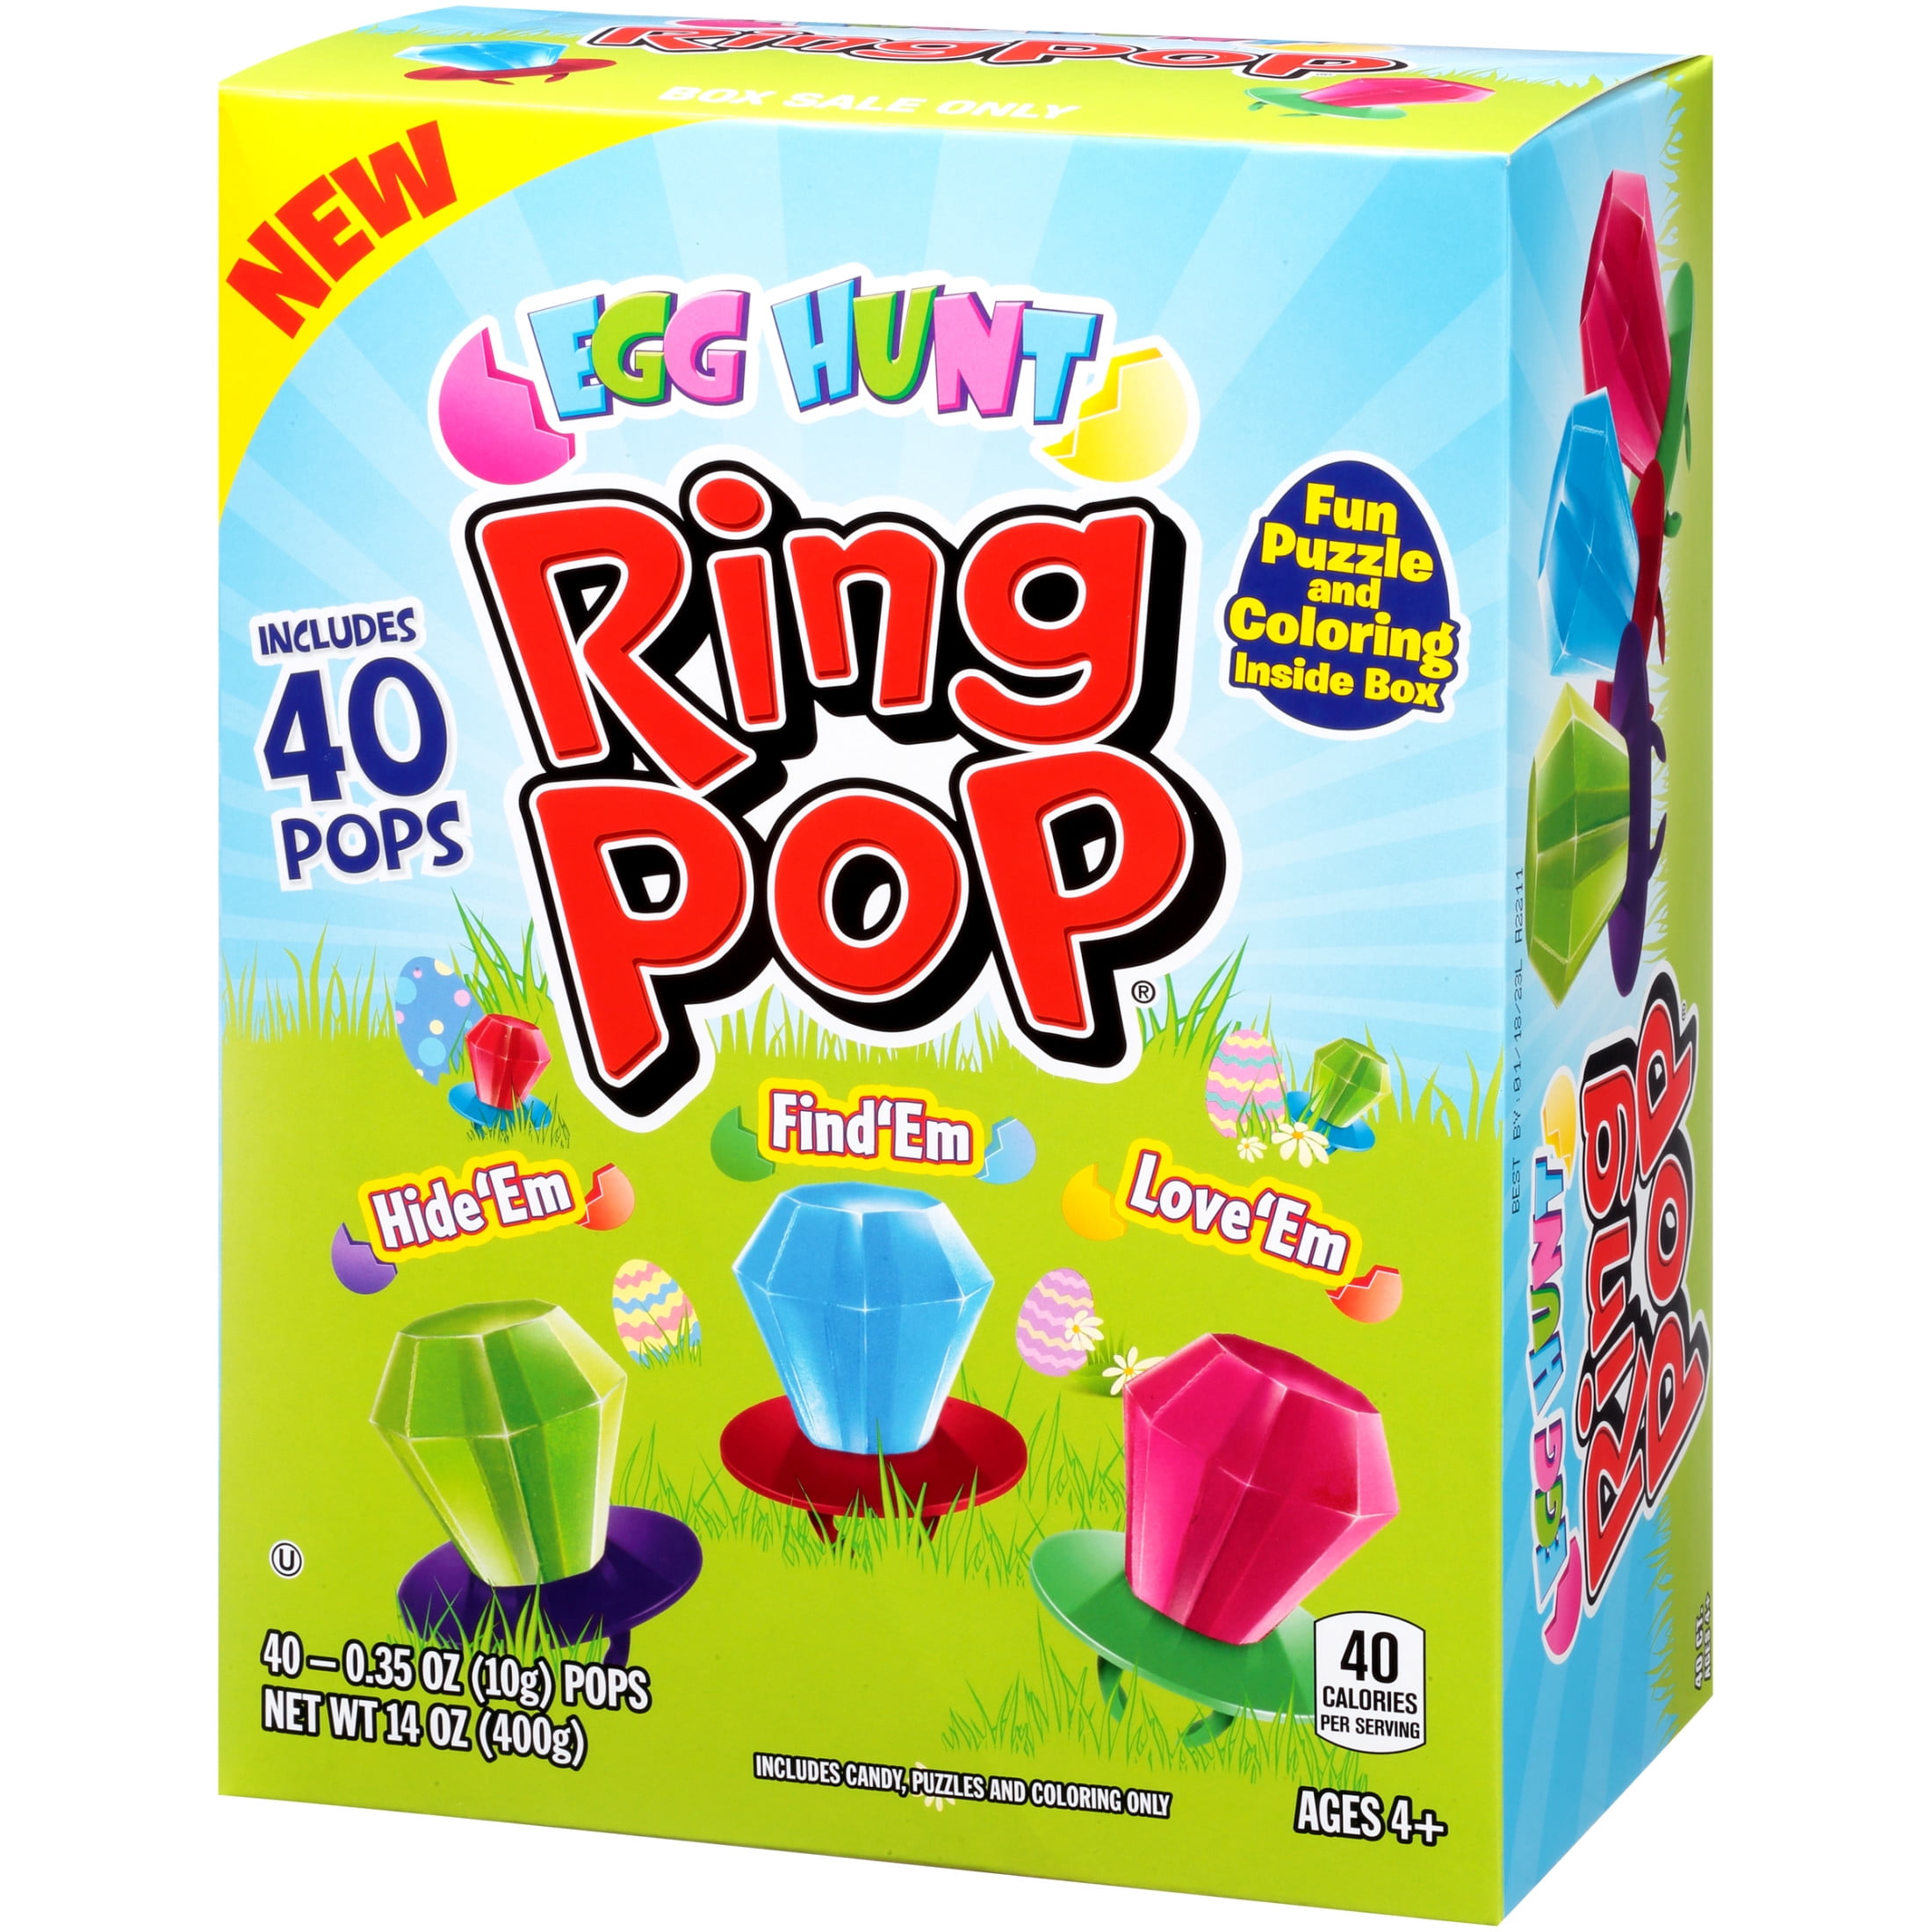 Bazooka Ring Pop Hard Candy - Pack of 24 for sale online | eBay